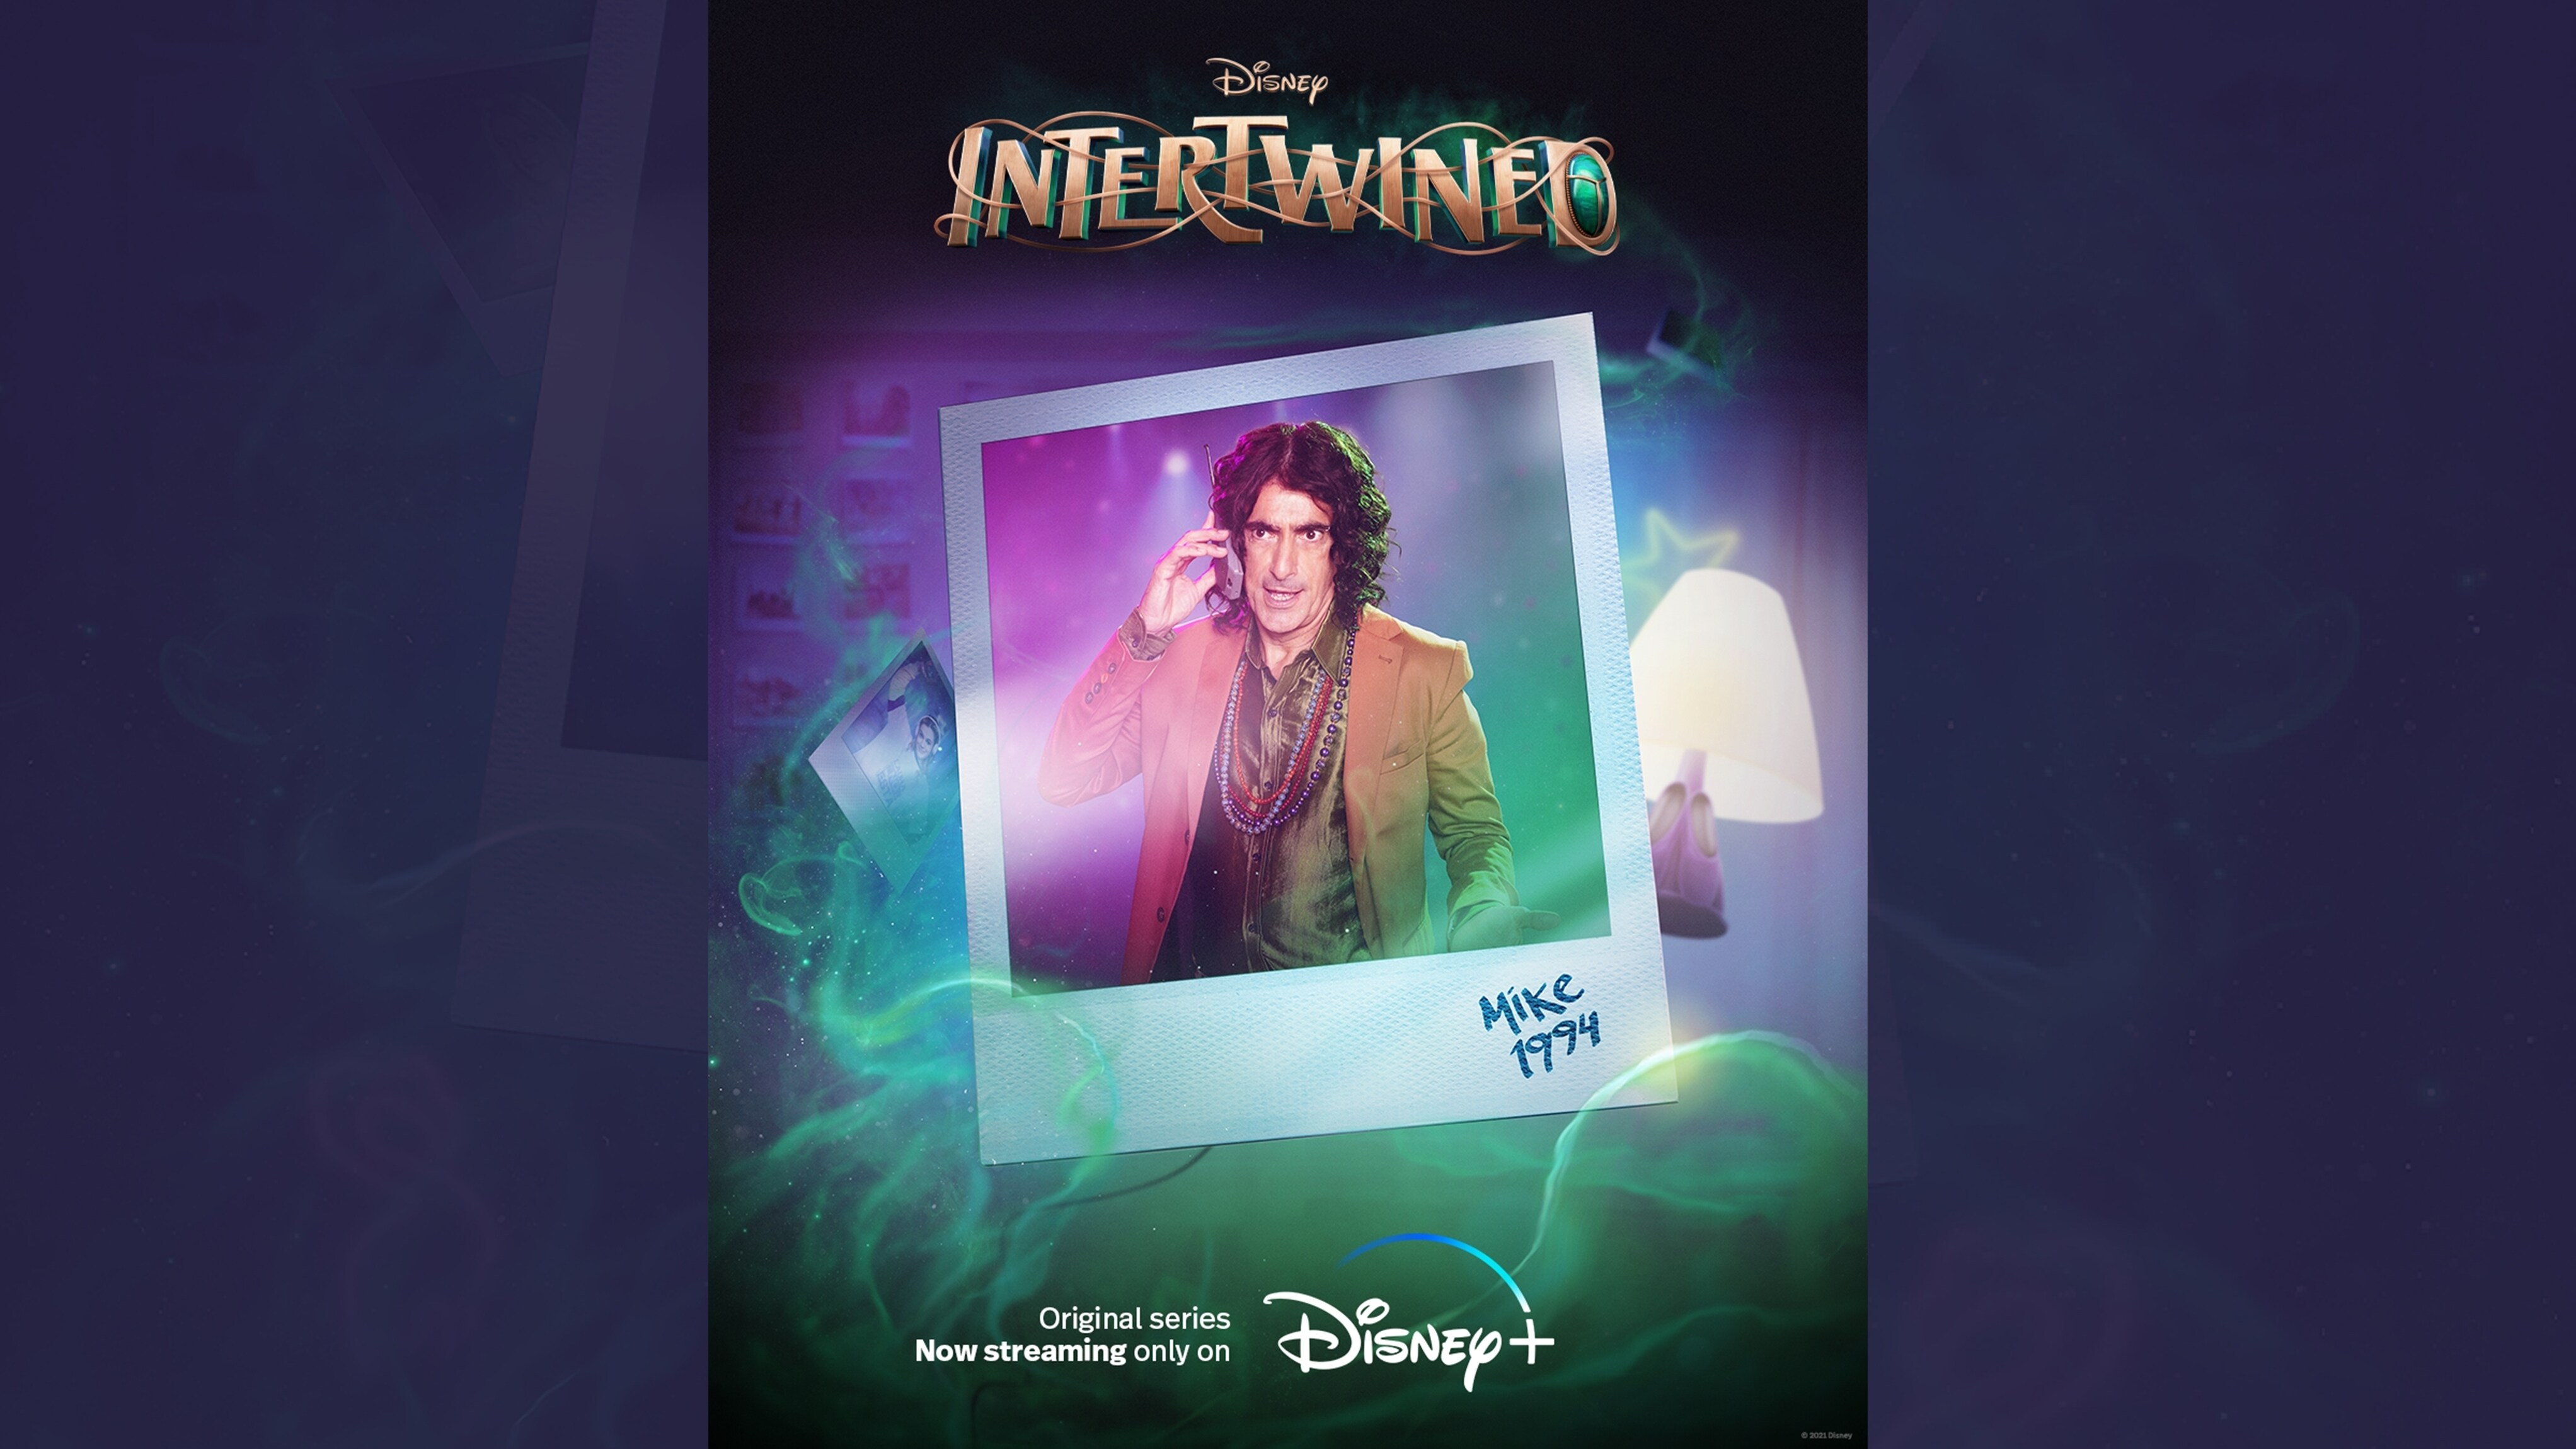 Disney | Intertwined | Mike (1994) | Original series now streaming only on Disney+